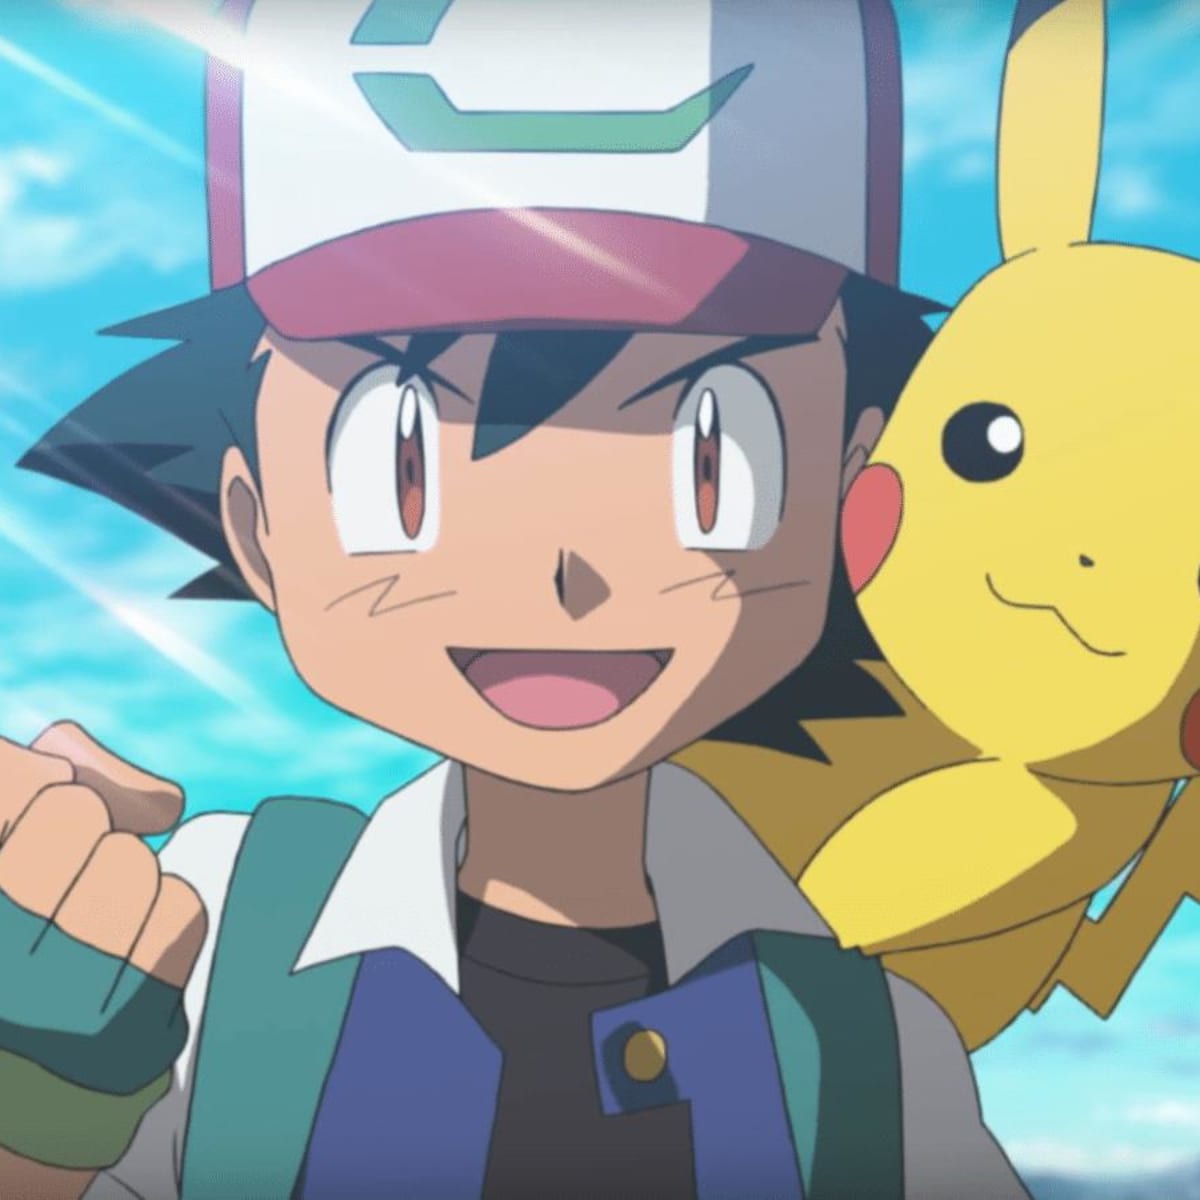 Ash and Pikachu's Journey Ends After 25 Years. Pokemon Reveals New Main  Characters